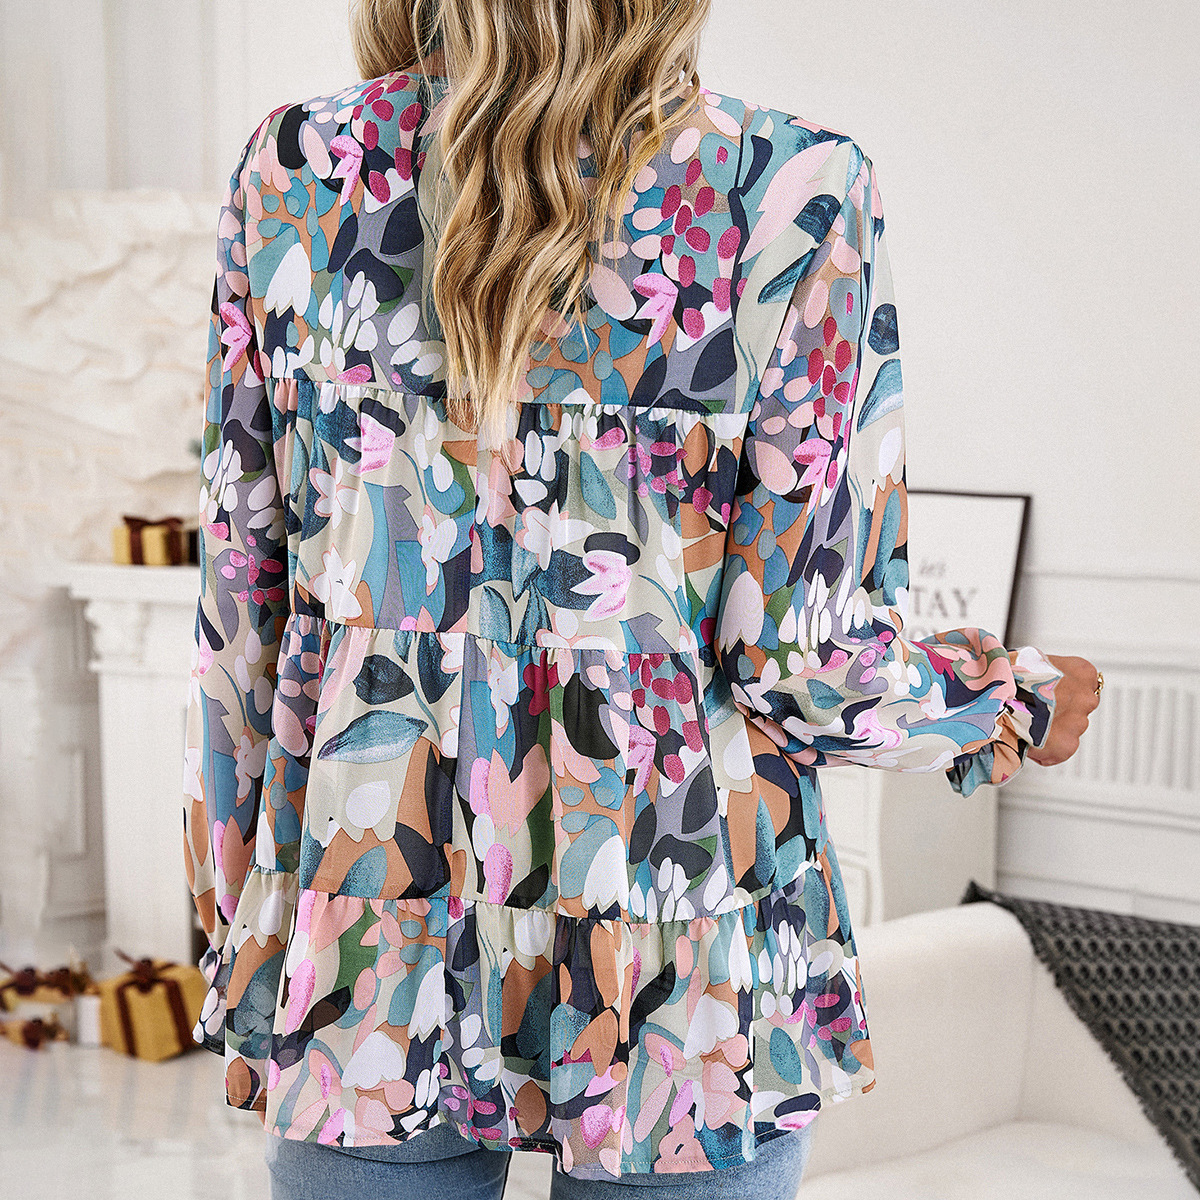 European style autumn and winter printing tops